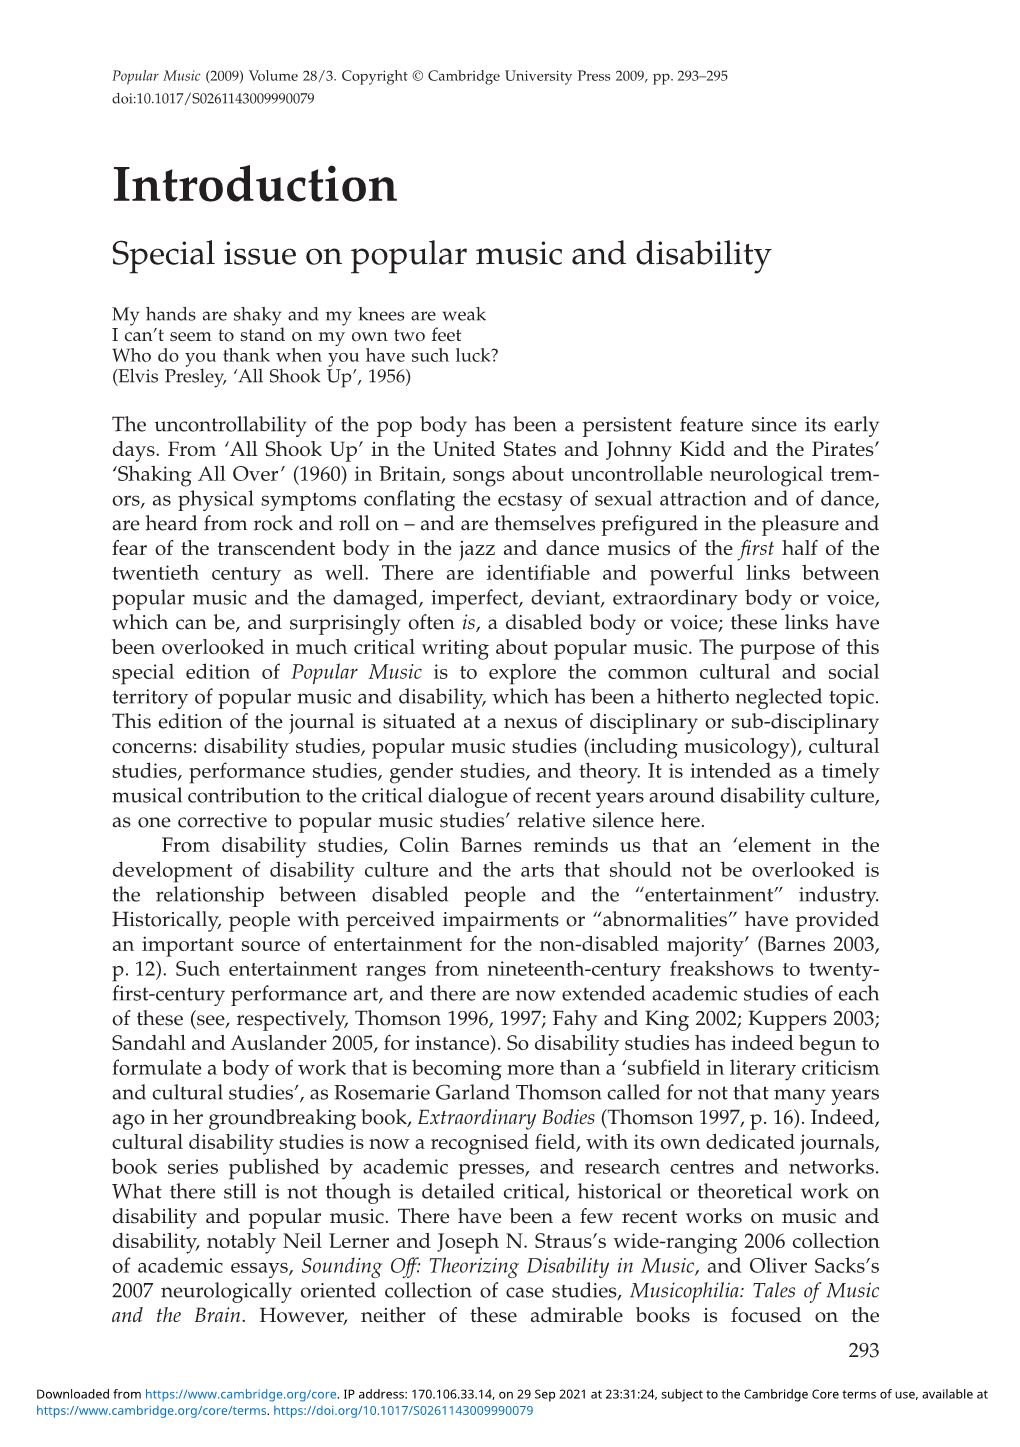 Introduction Special Issue on Popular Music and Disability